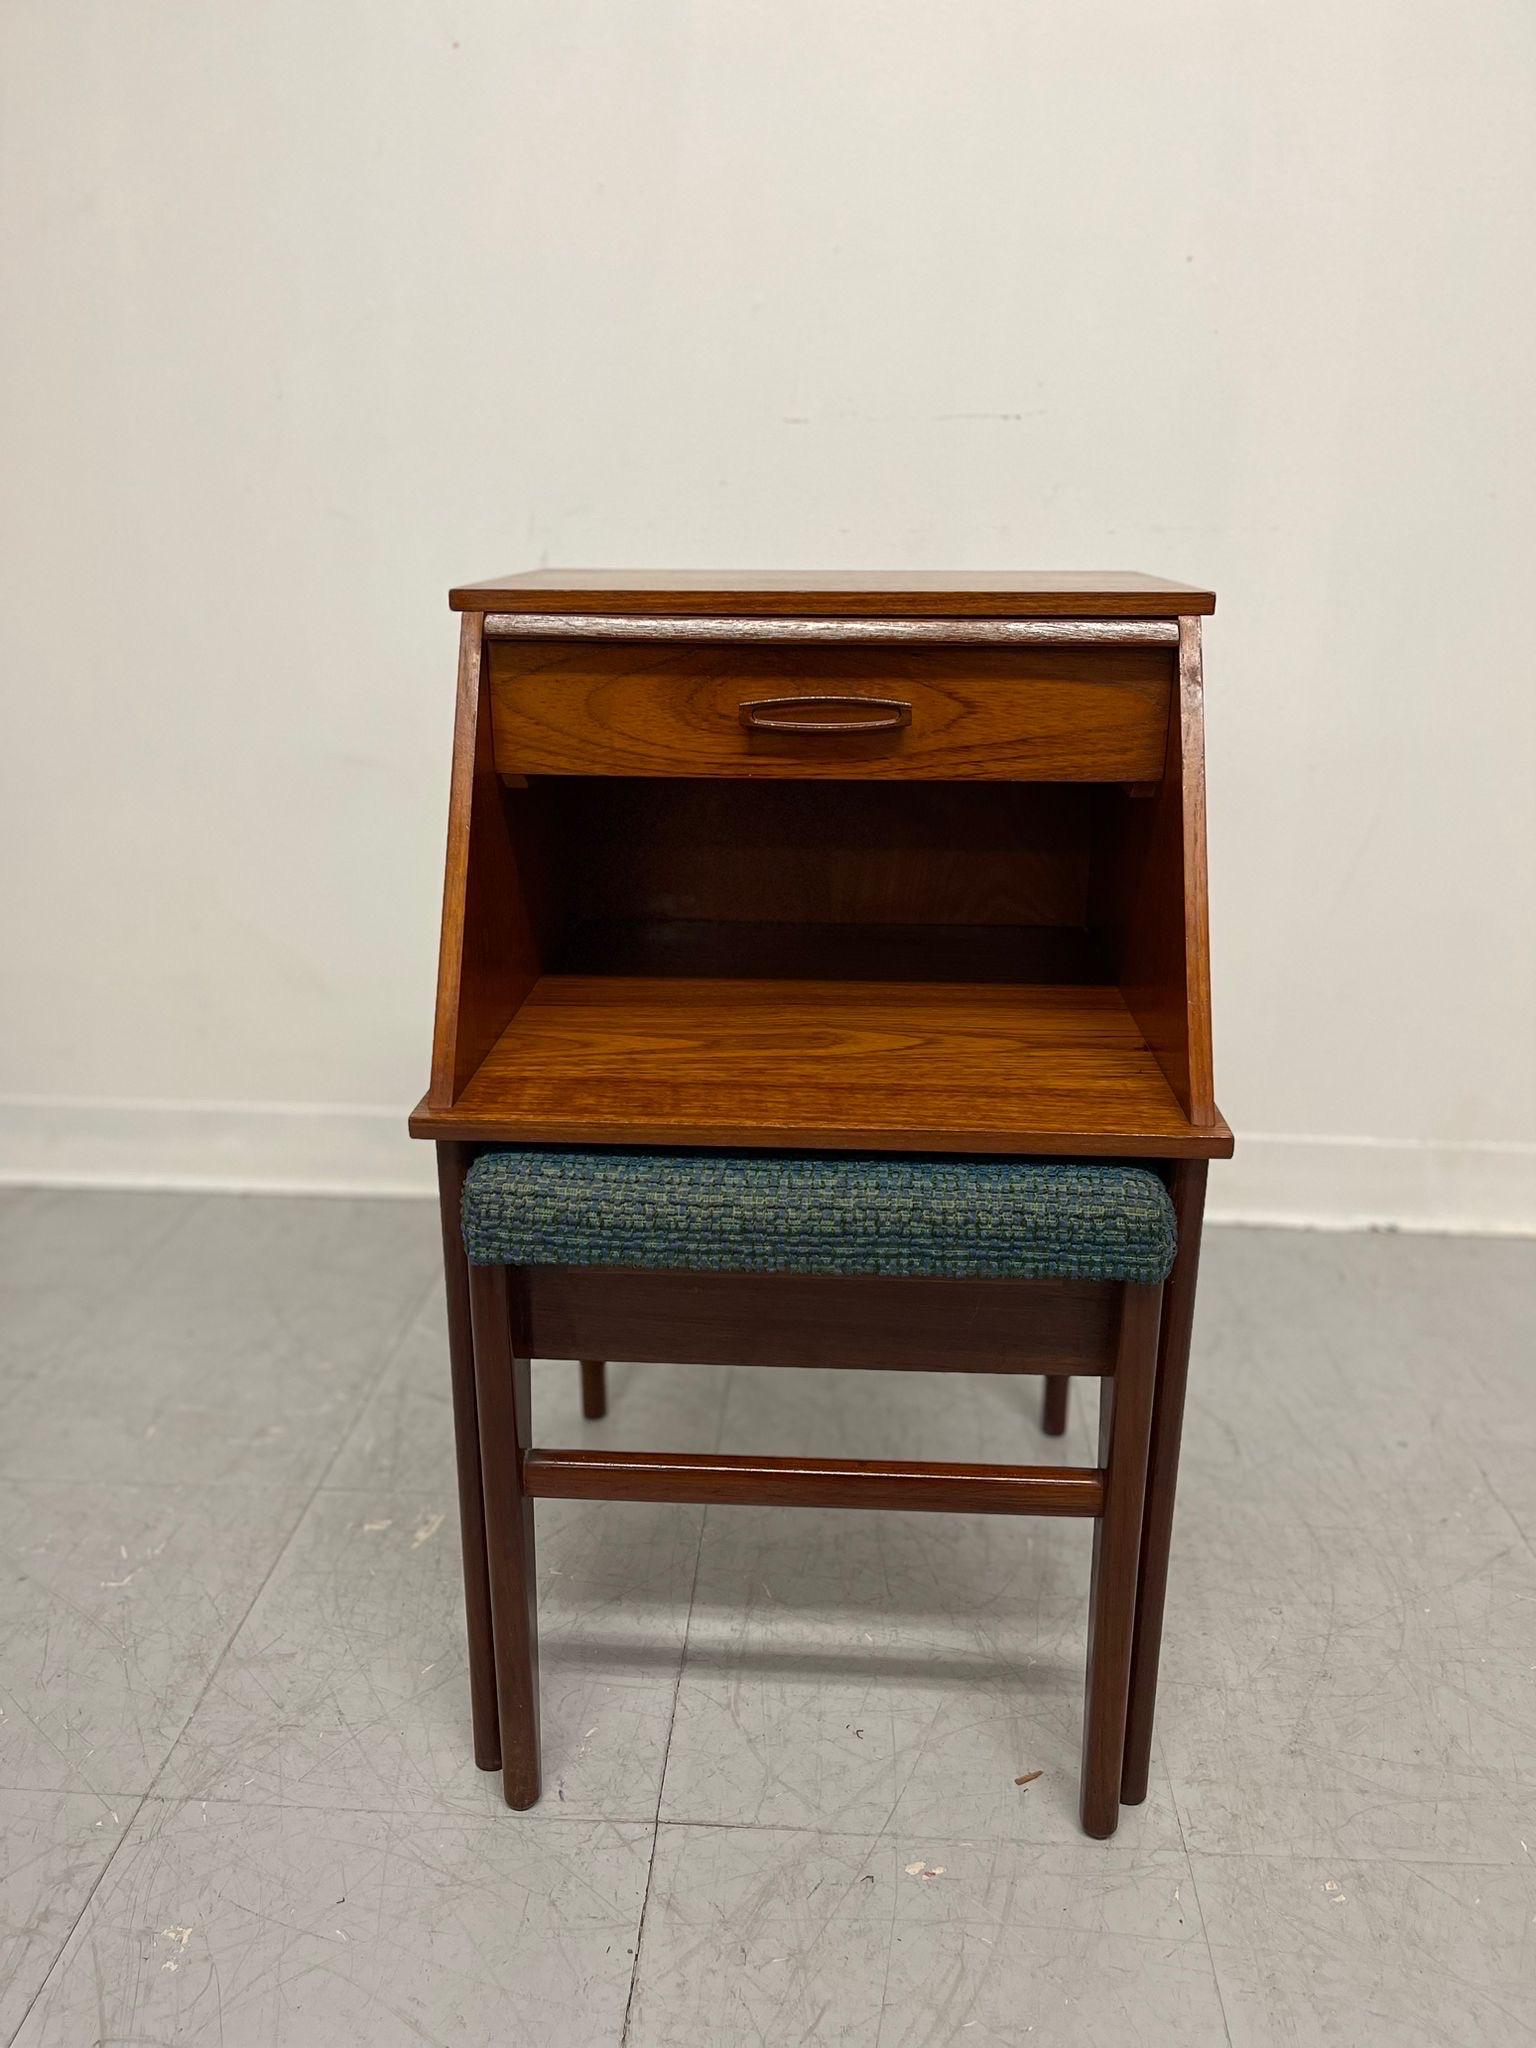 English Designer Chippy Telephone Seat with Blue Fabric Cushion. Wooden Handles on the Drawer, Classic Tapered Legs. Above the Drawer is a History Call List. Possibly Teak. Circa 1960s/1970s. Vintage Condition Consistent with Age as